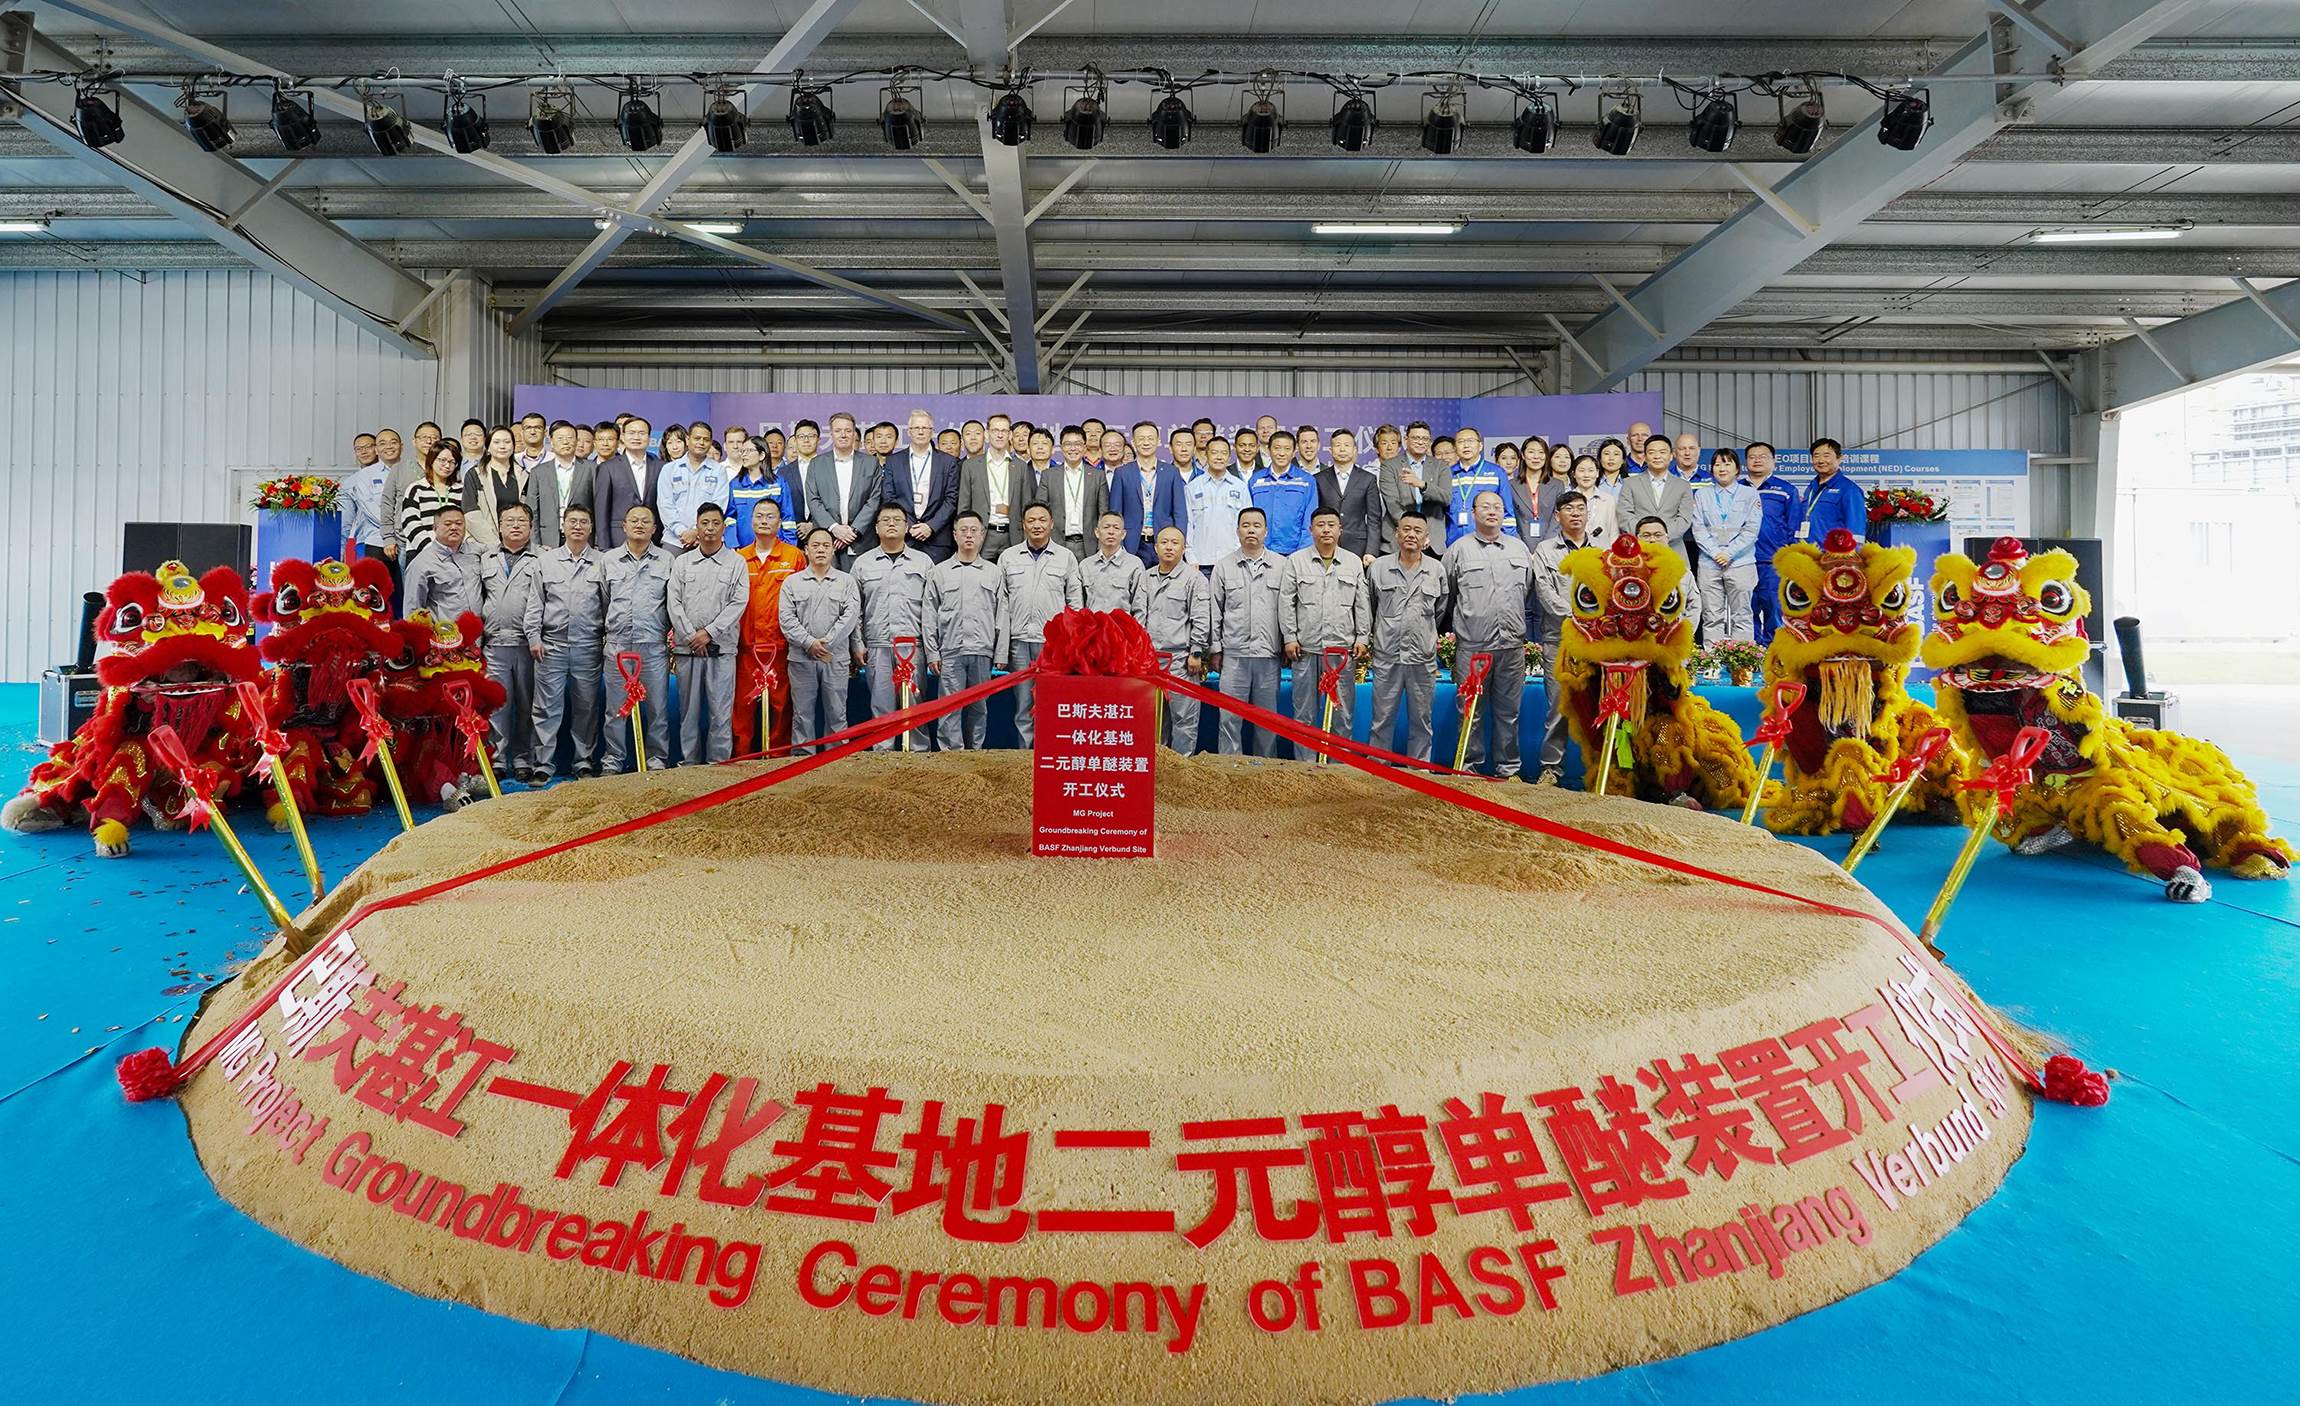 BASF breaks ground on methyl glycols plant in China, aims to meet demand for brake fluids | Autocar Professional